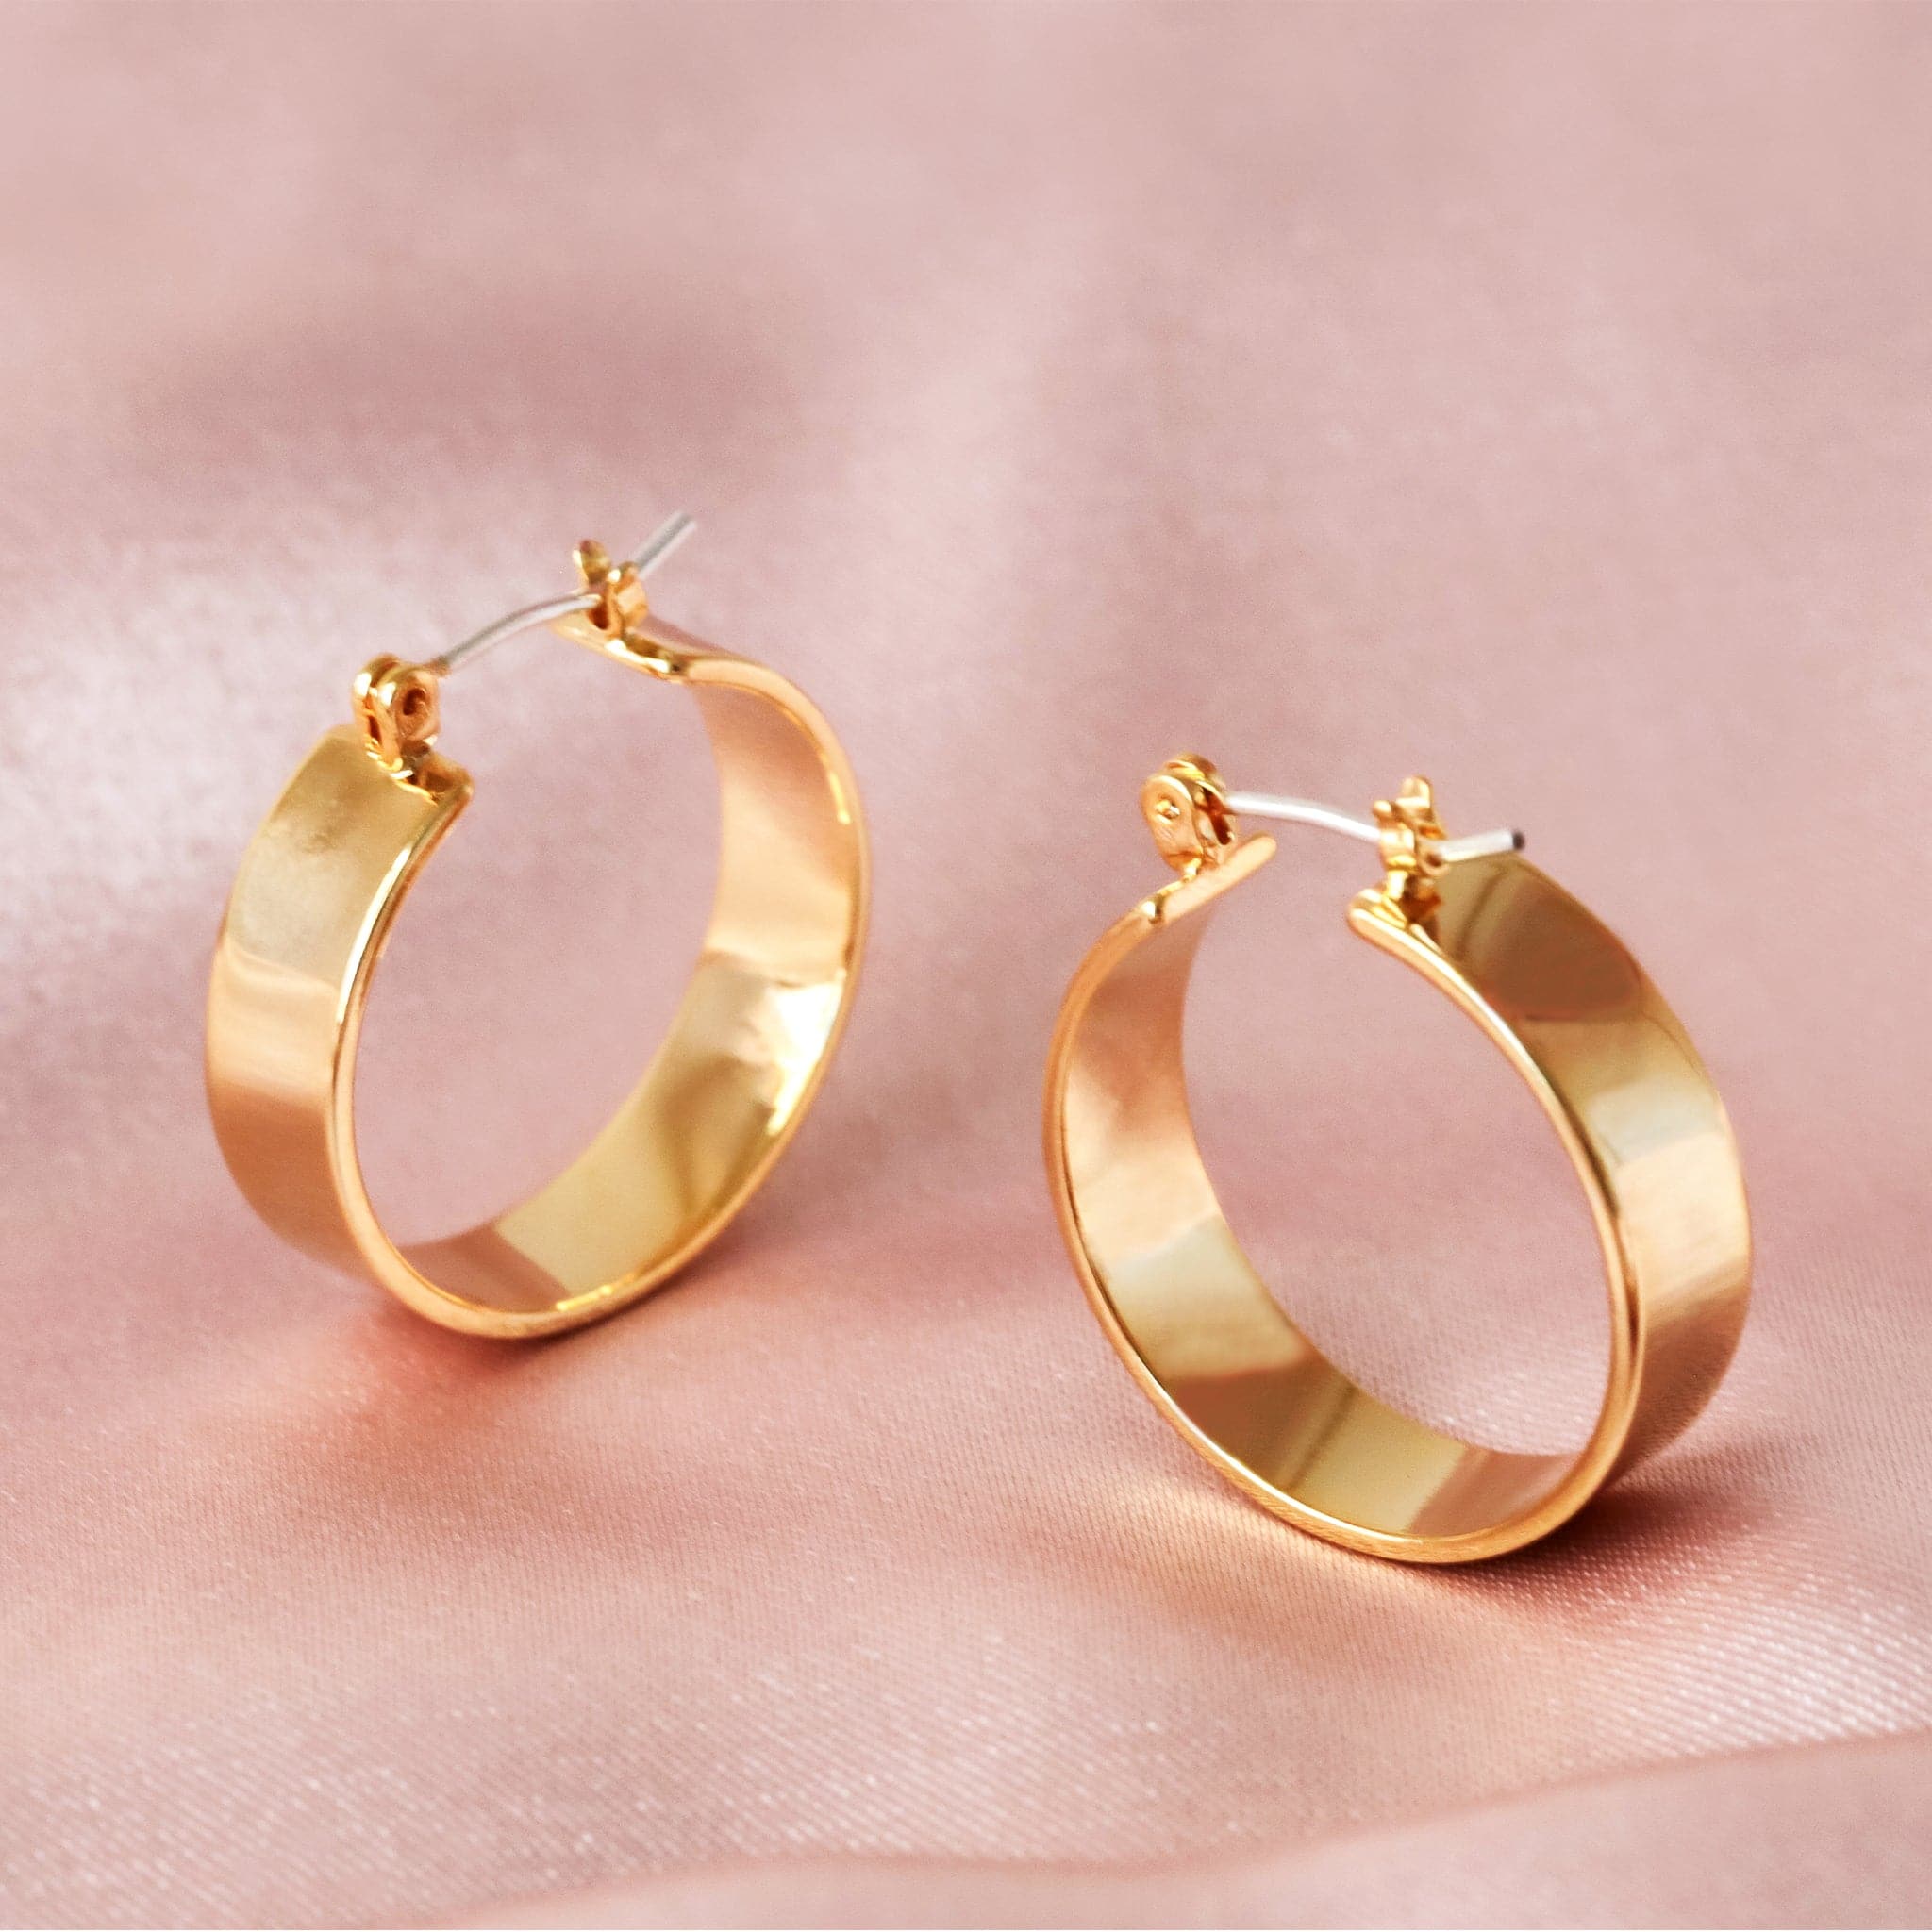 Medium sized gold hoops that have a wider frame and a thin depth. They feature a straight post and a clasp on the back top of the hoop to secure it on your ear.